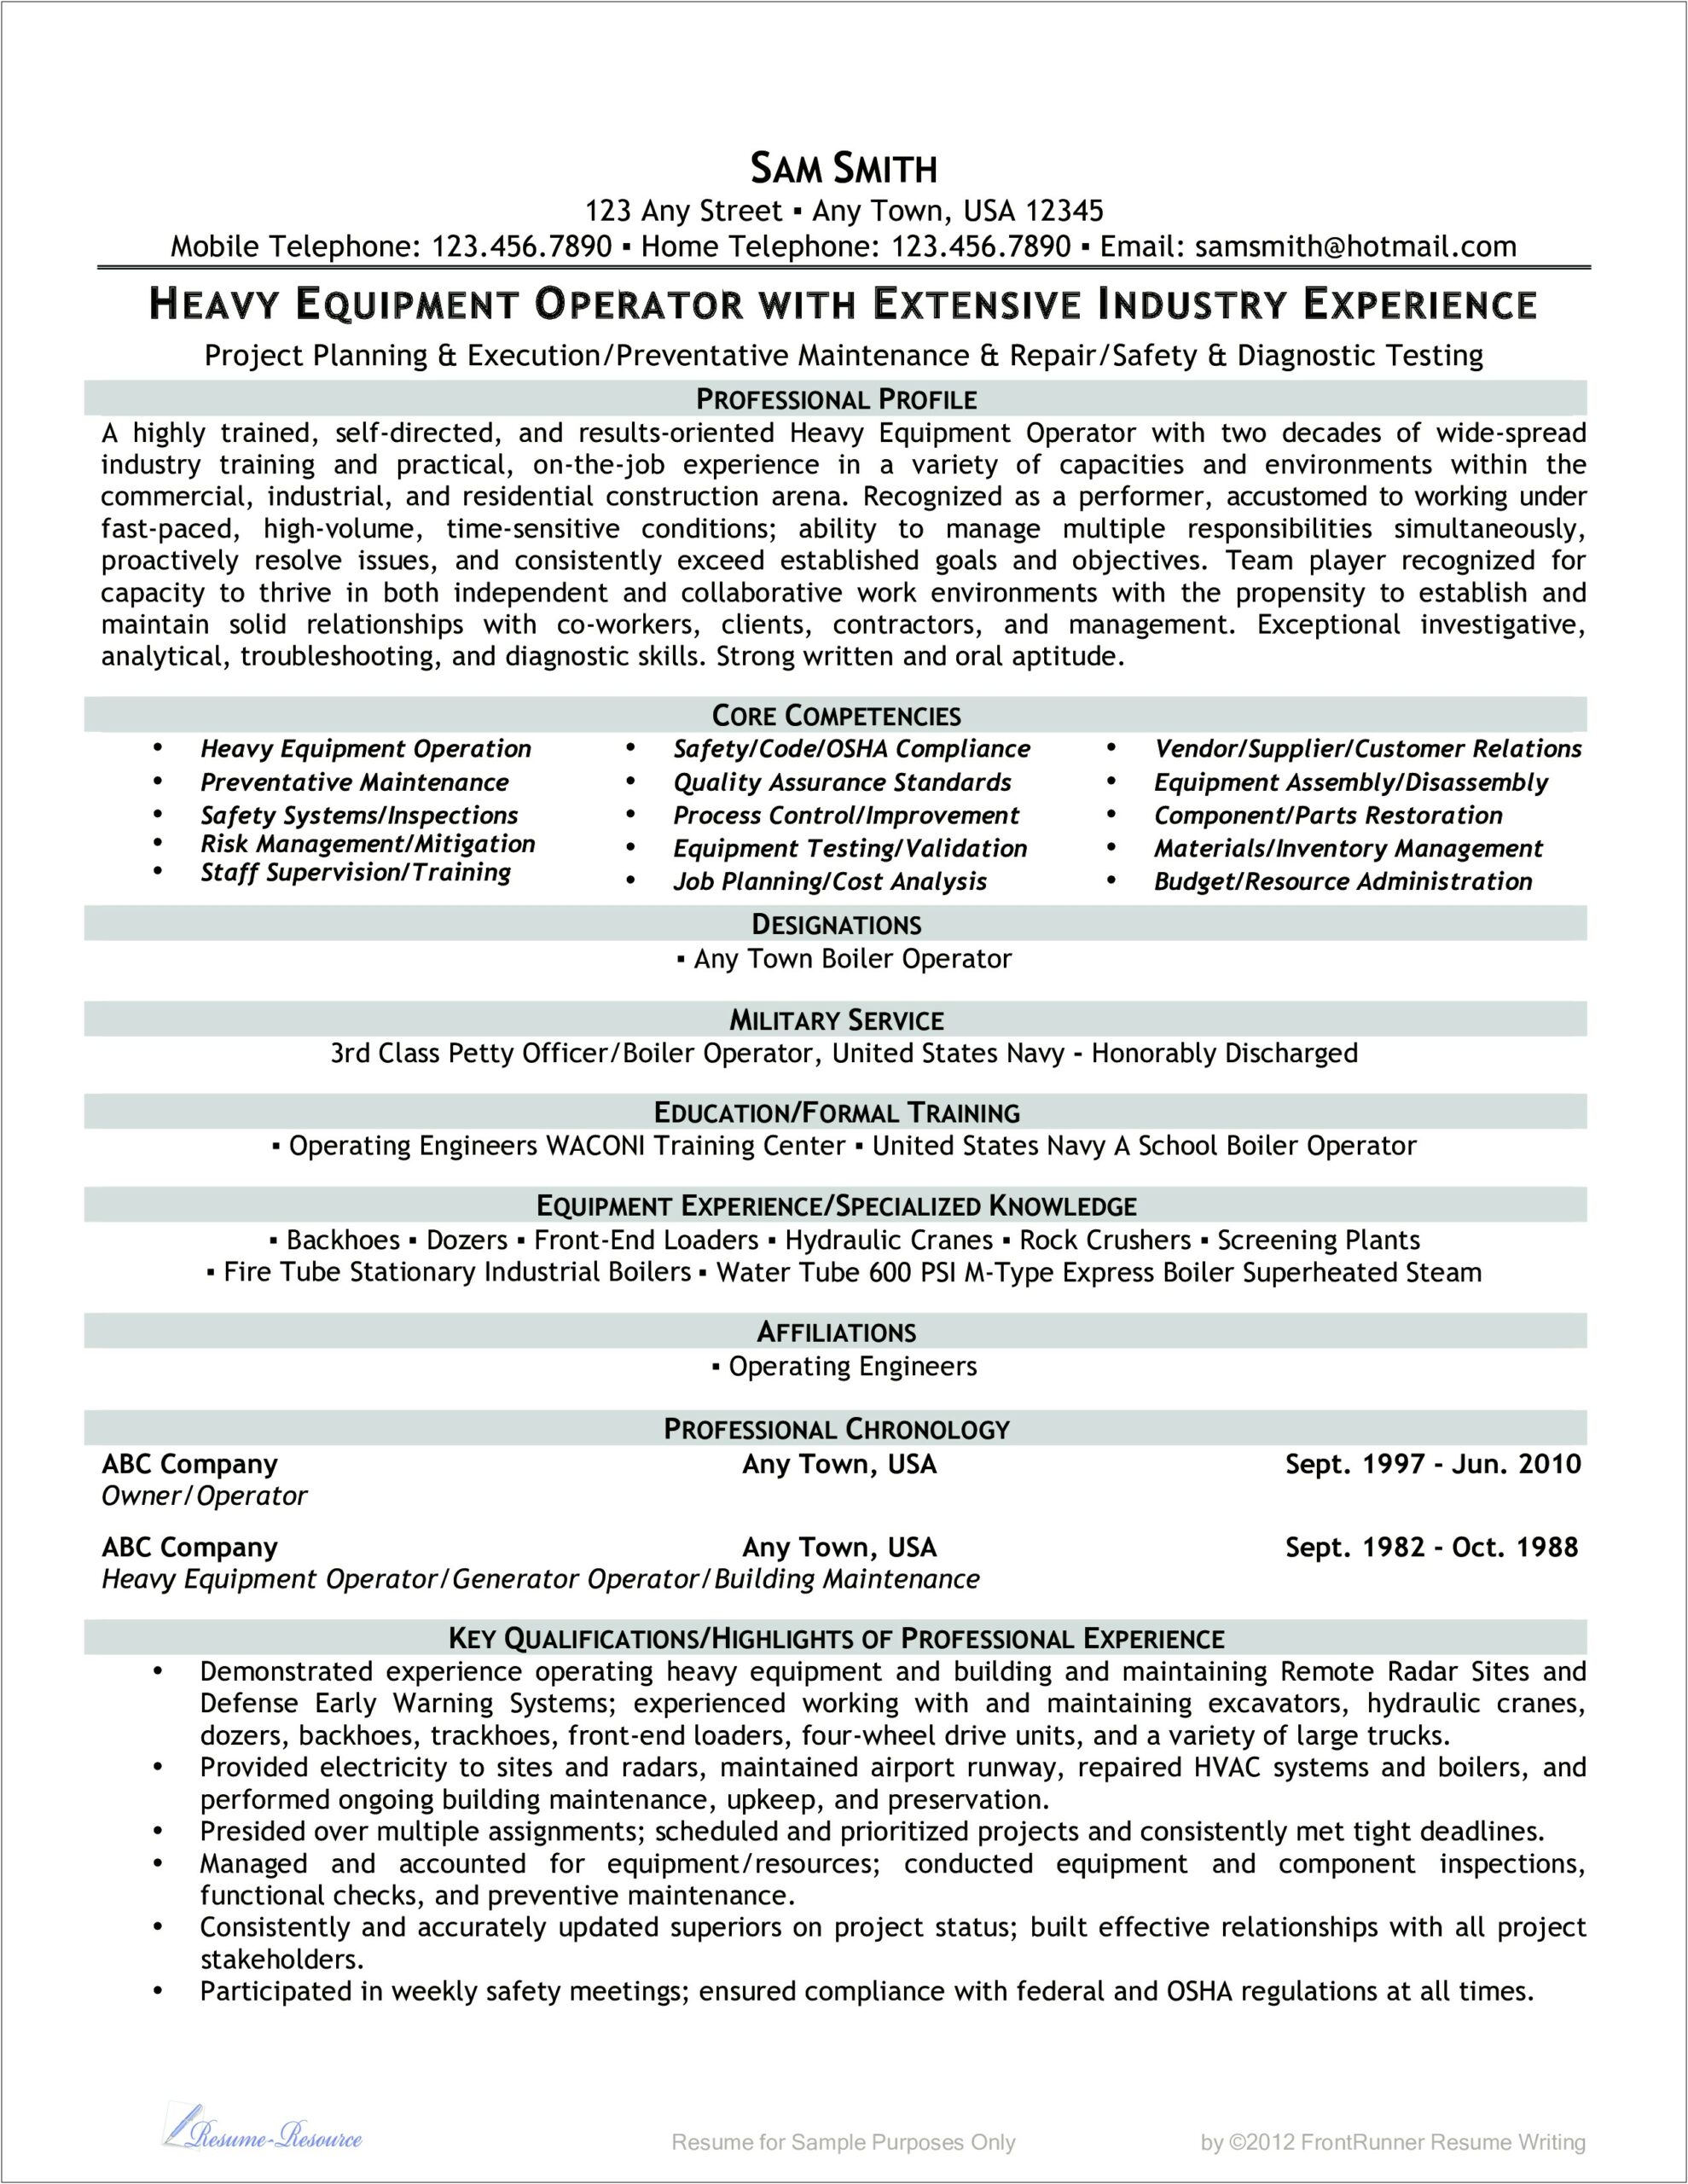 Functional Resume Examples For Heavy Equipment Operator